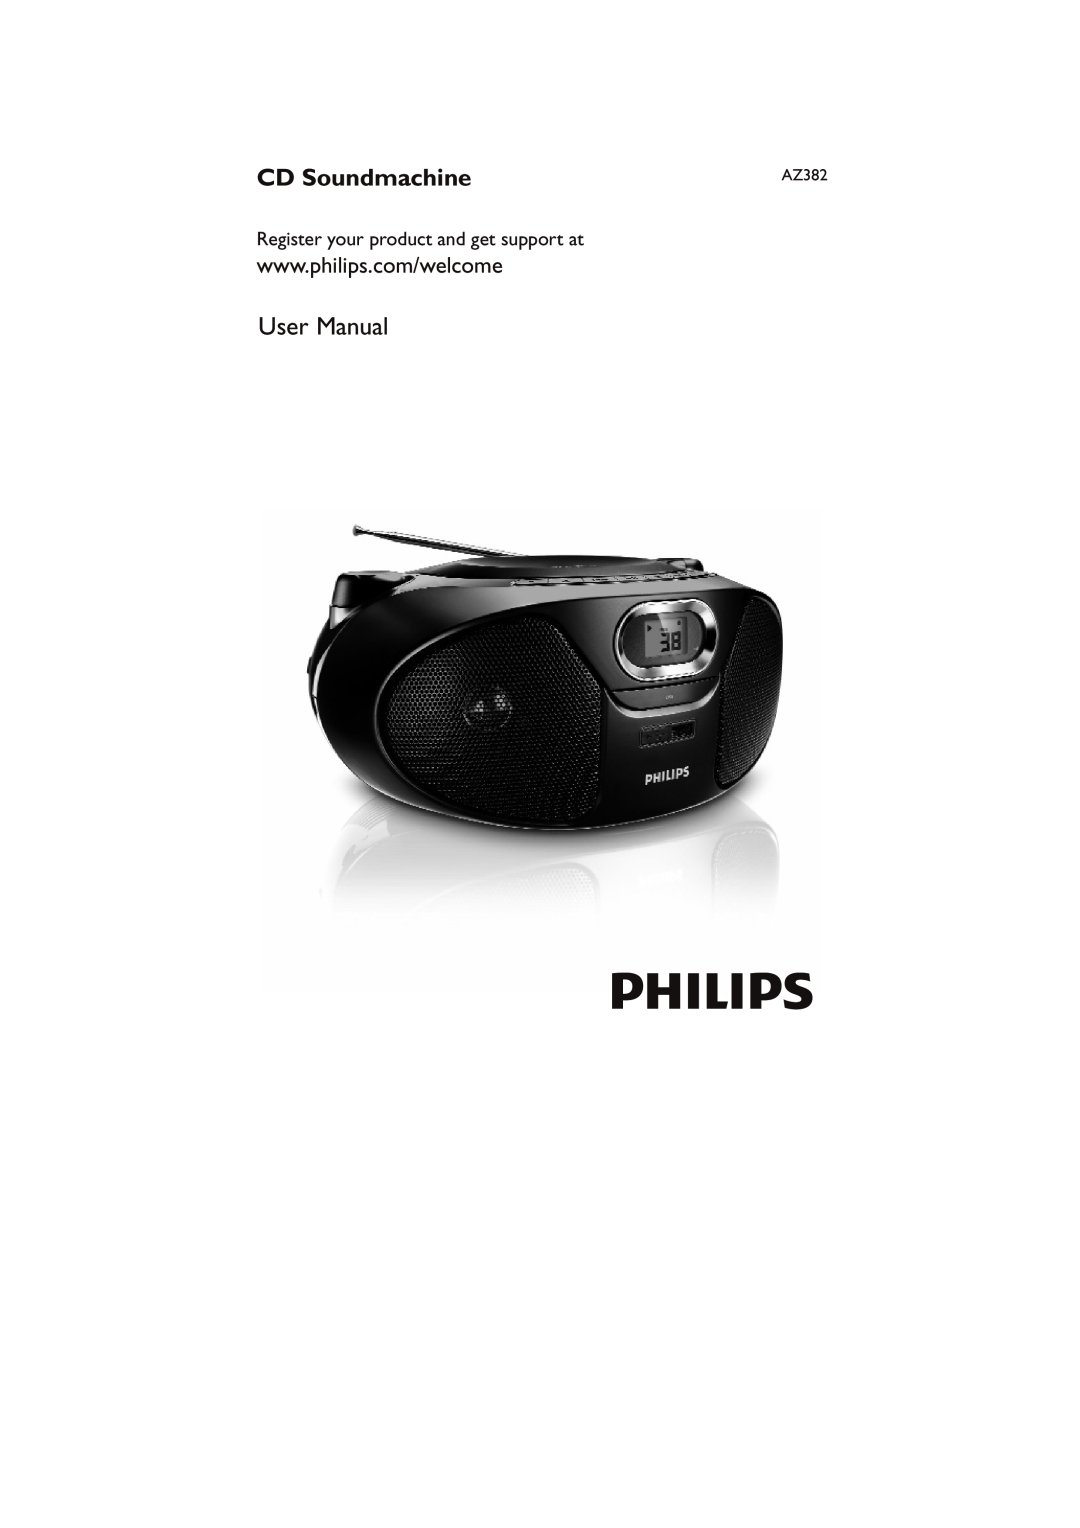 Philips AZ382 user manual CD Soundmachine, Register your product and get support at 